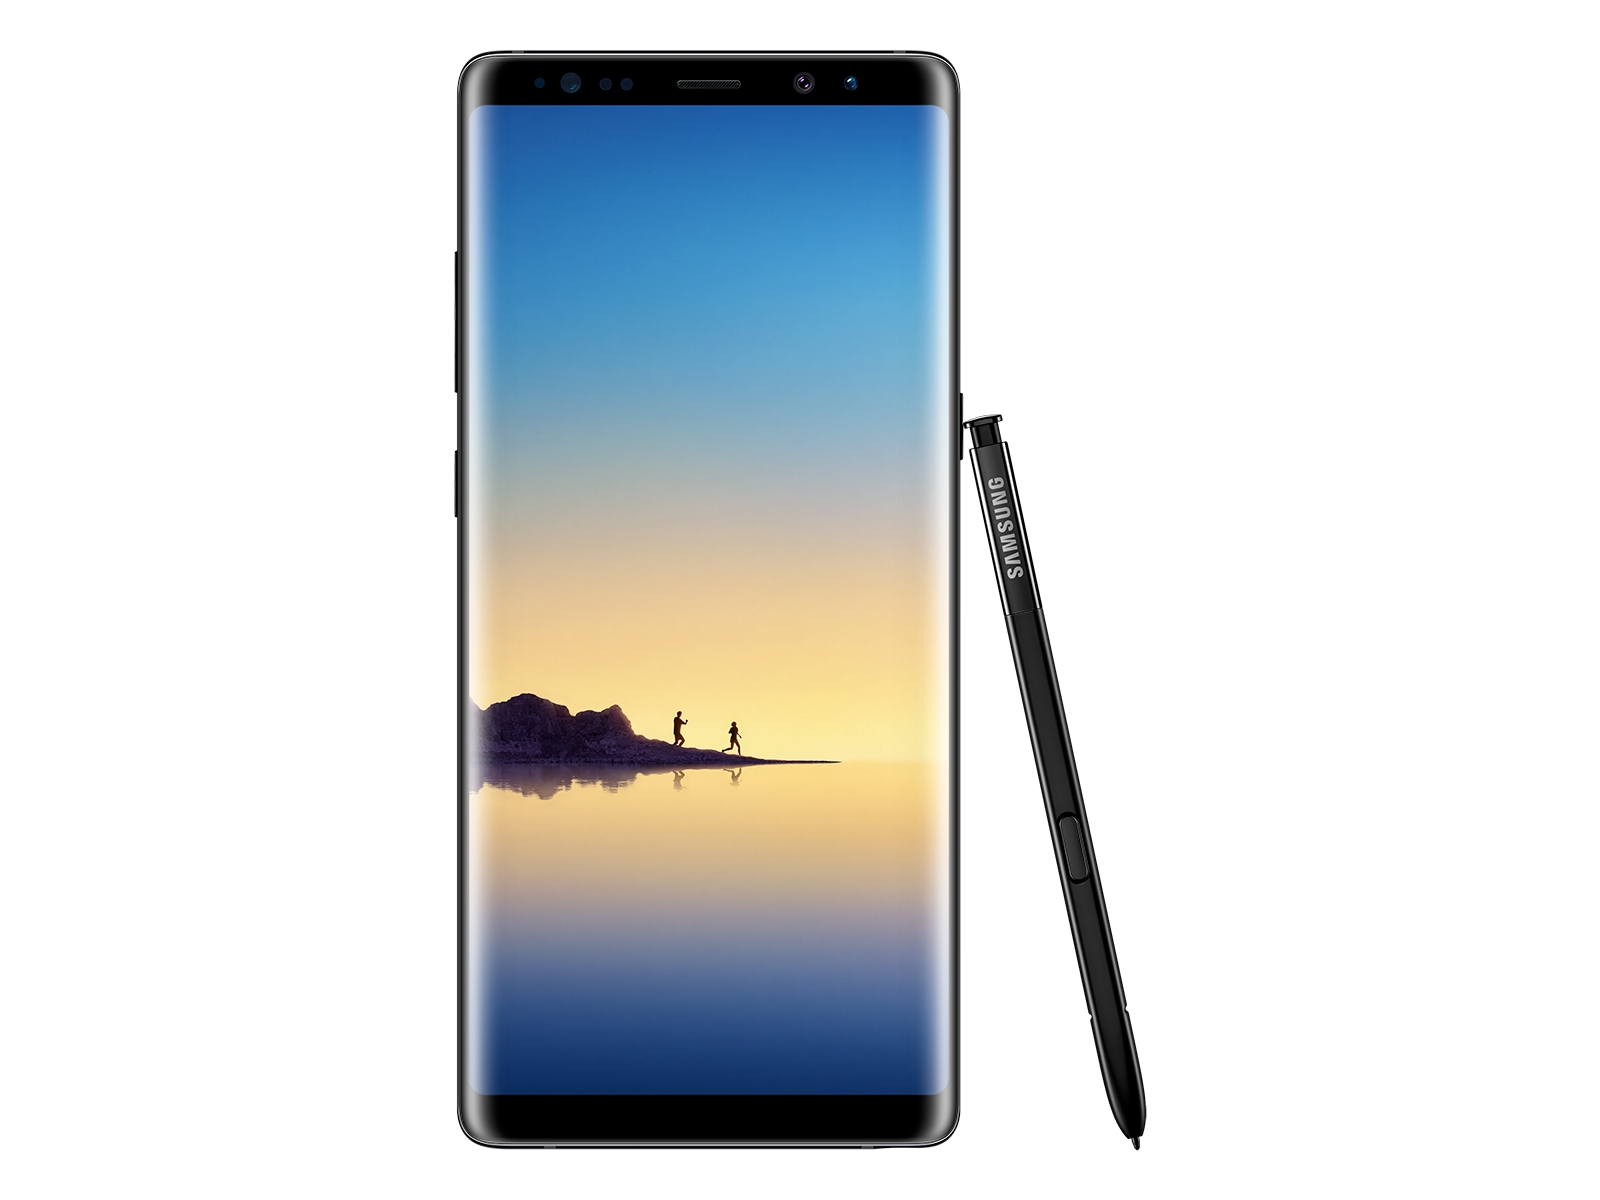 Samsung Galaxy Note 10 Lite Review: Hands on with the mid-range Note